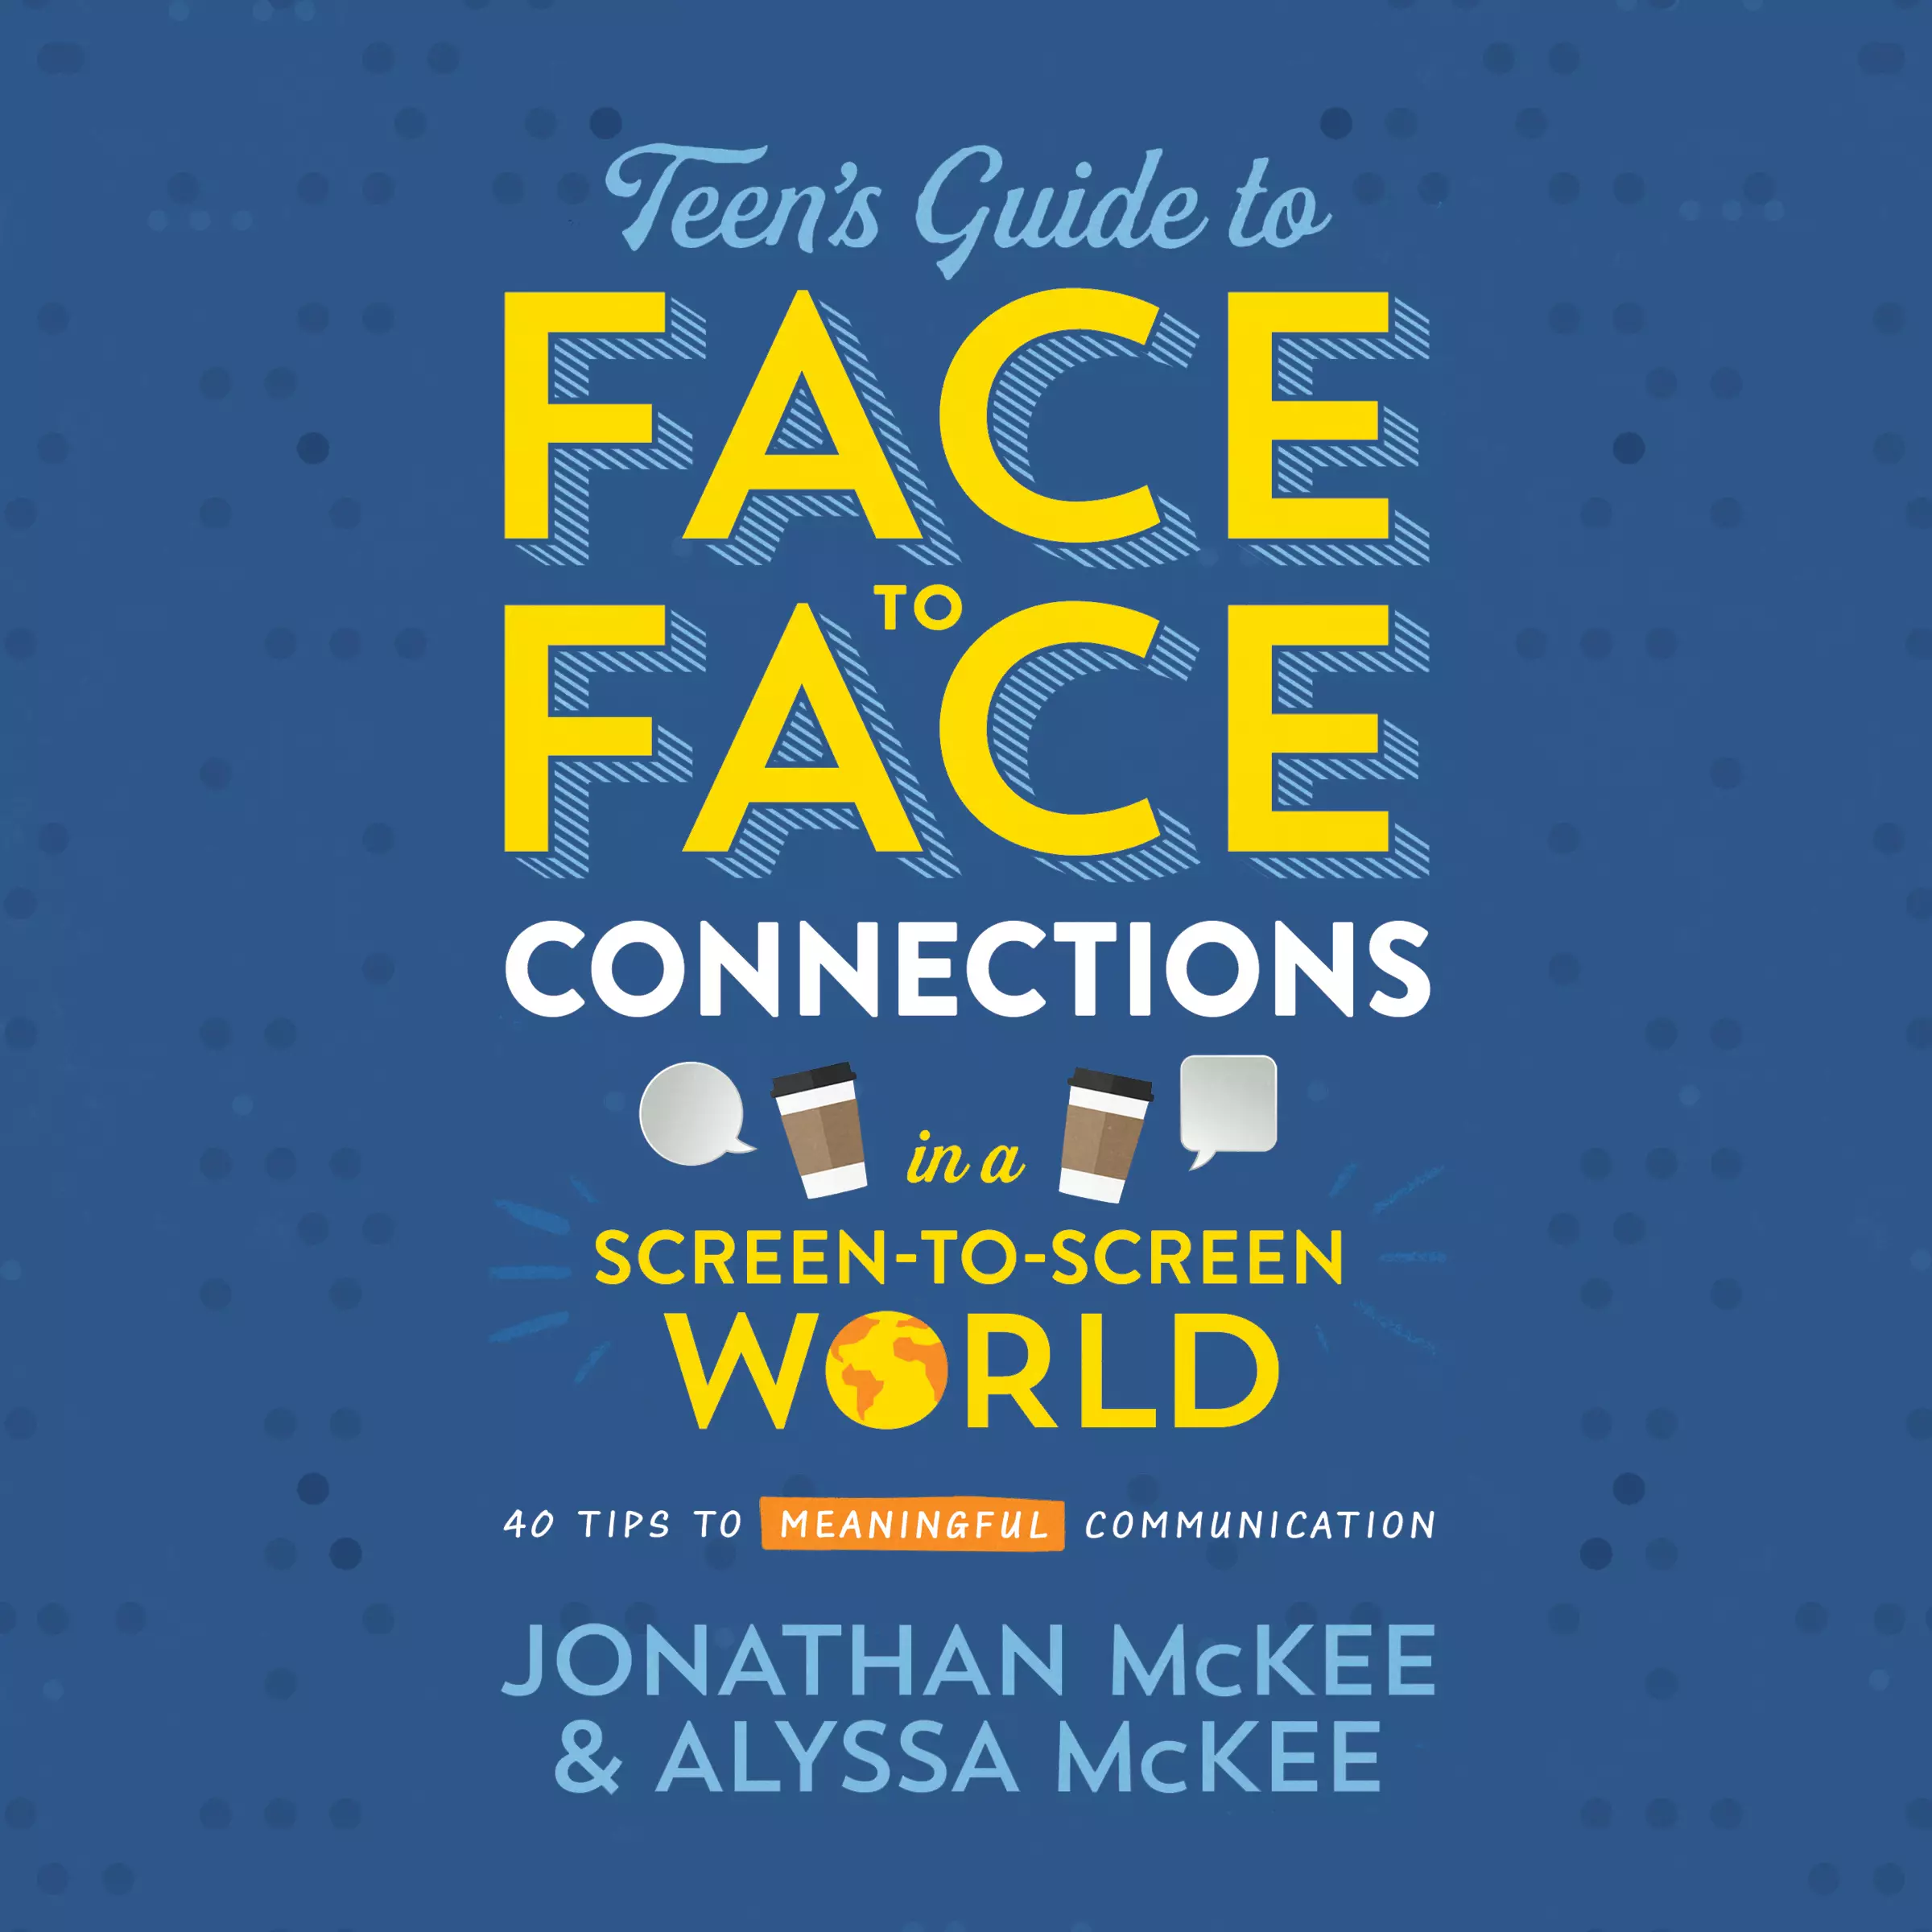 Teen's Guide to Face-to-Face Connections in a Screen-to-Screen World